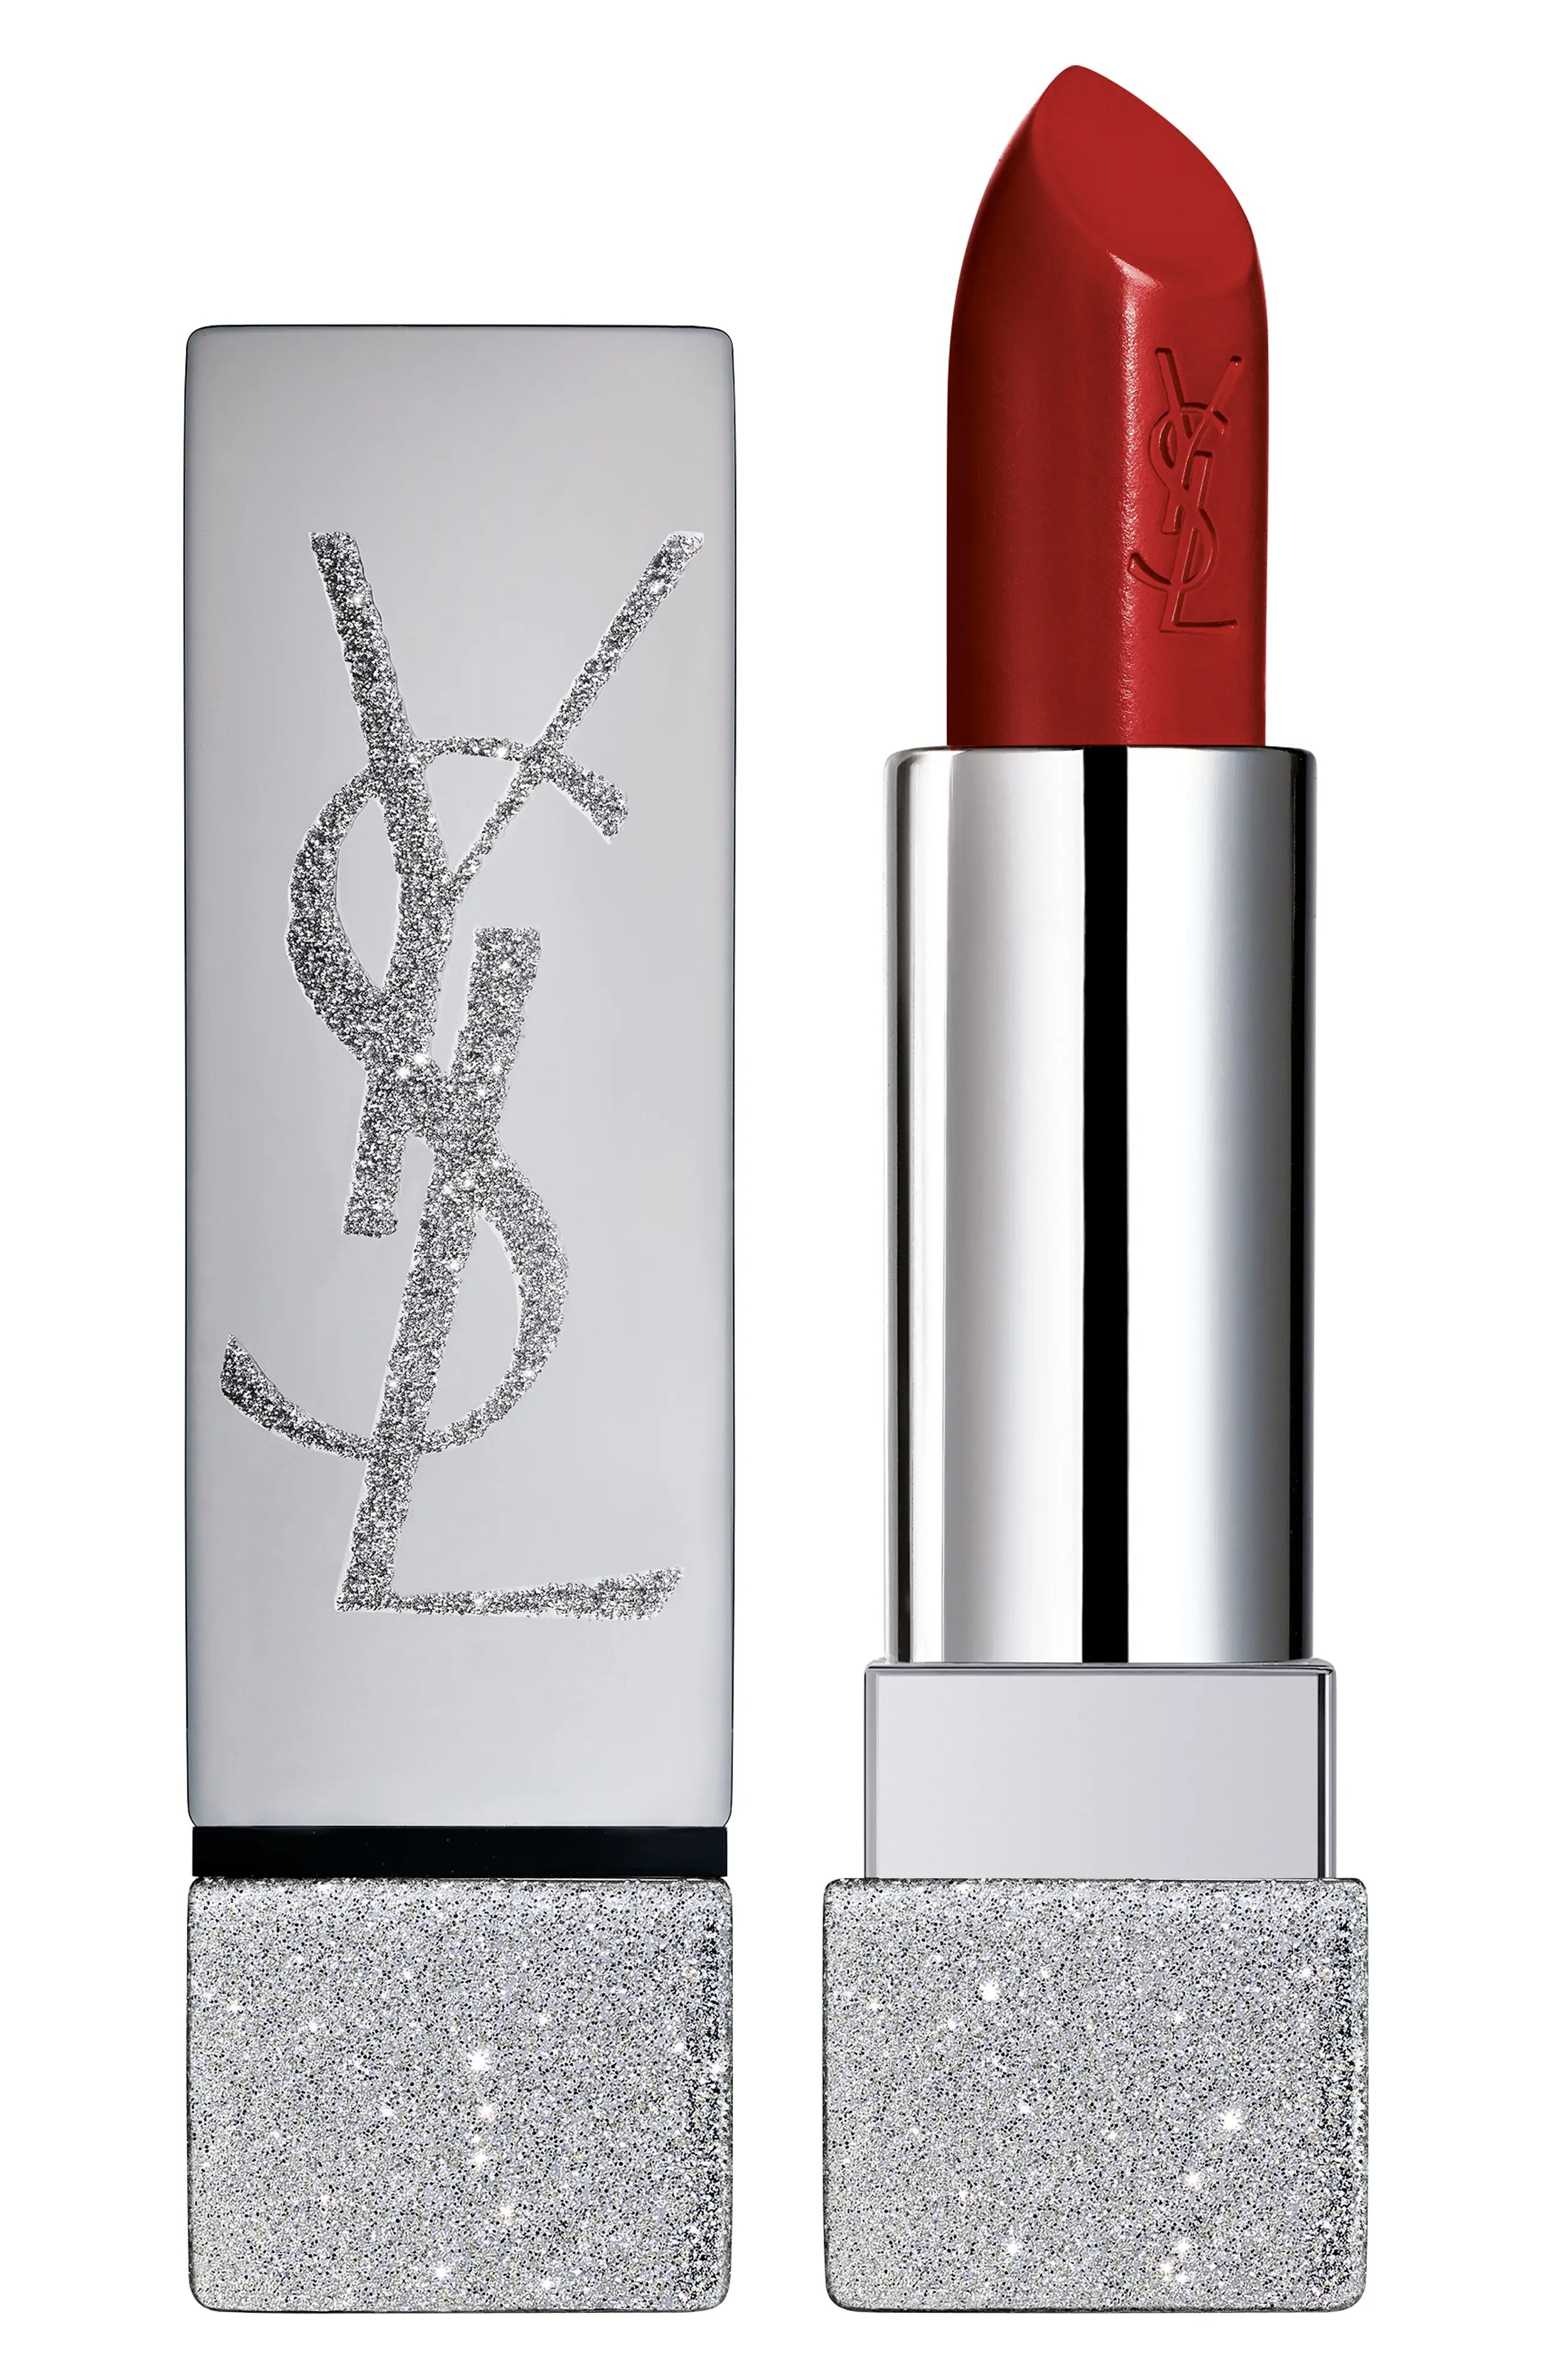 Yves Saint Laurent x Zoe Kravitz Rouge Pur Couture Lipstick in 146 Paris Stroll at Nordstrom | Nordstrom